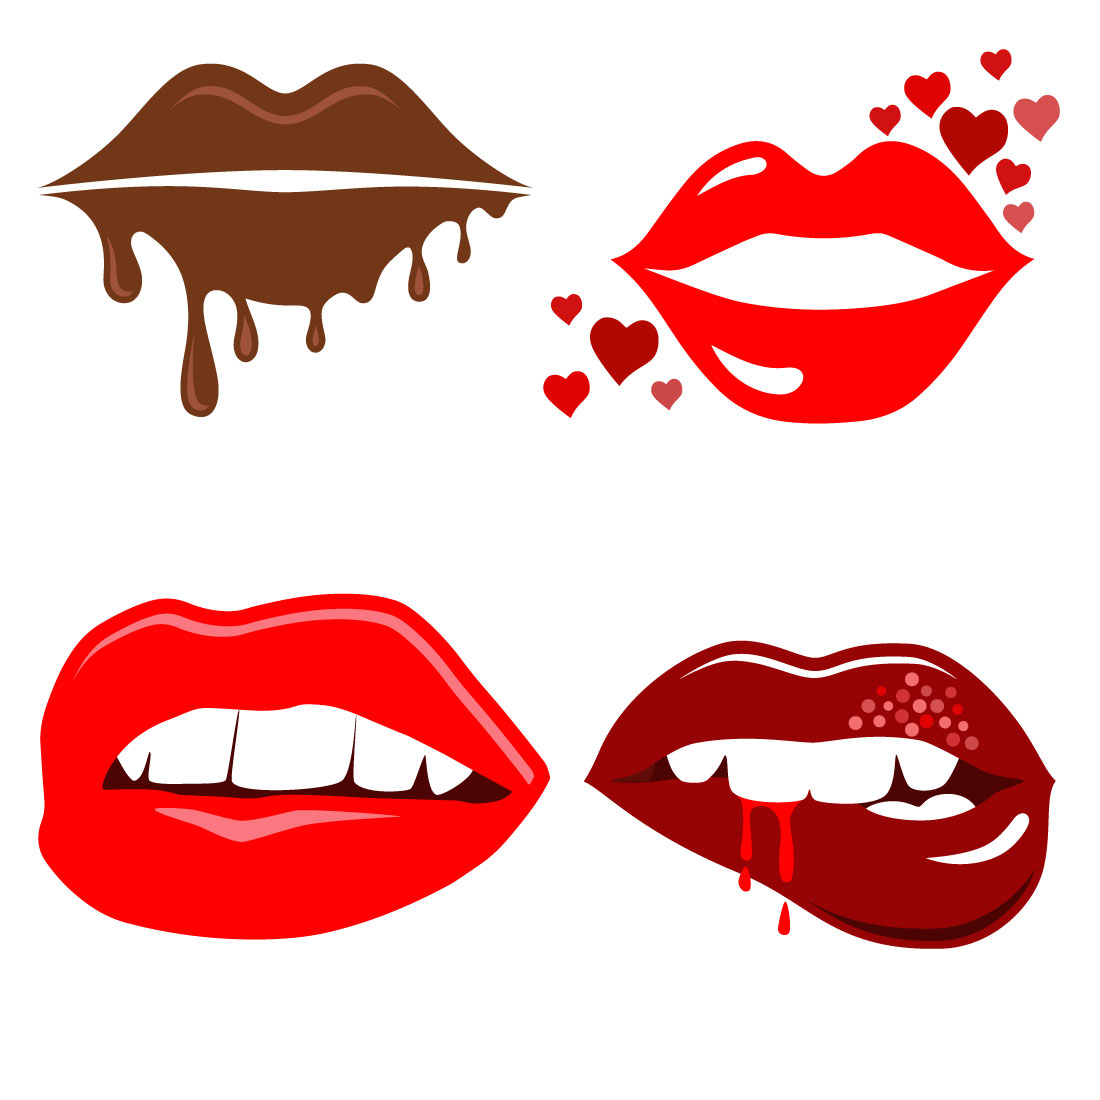 Hot and Beautiful Lips Design Bundle cover image.